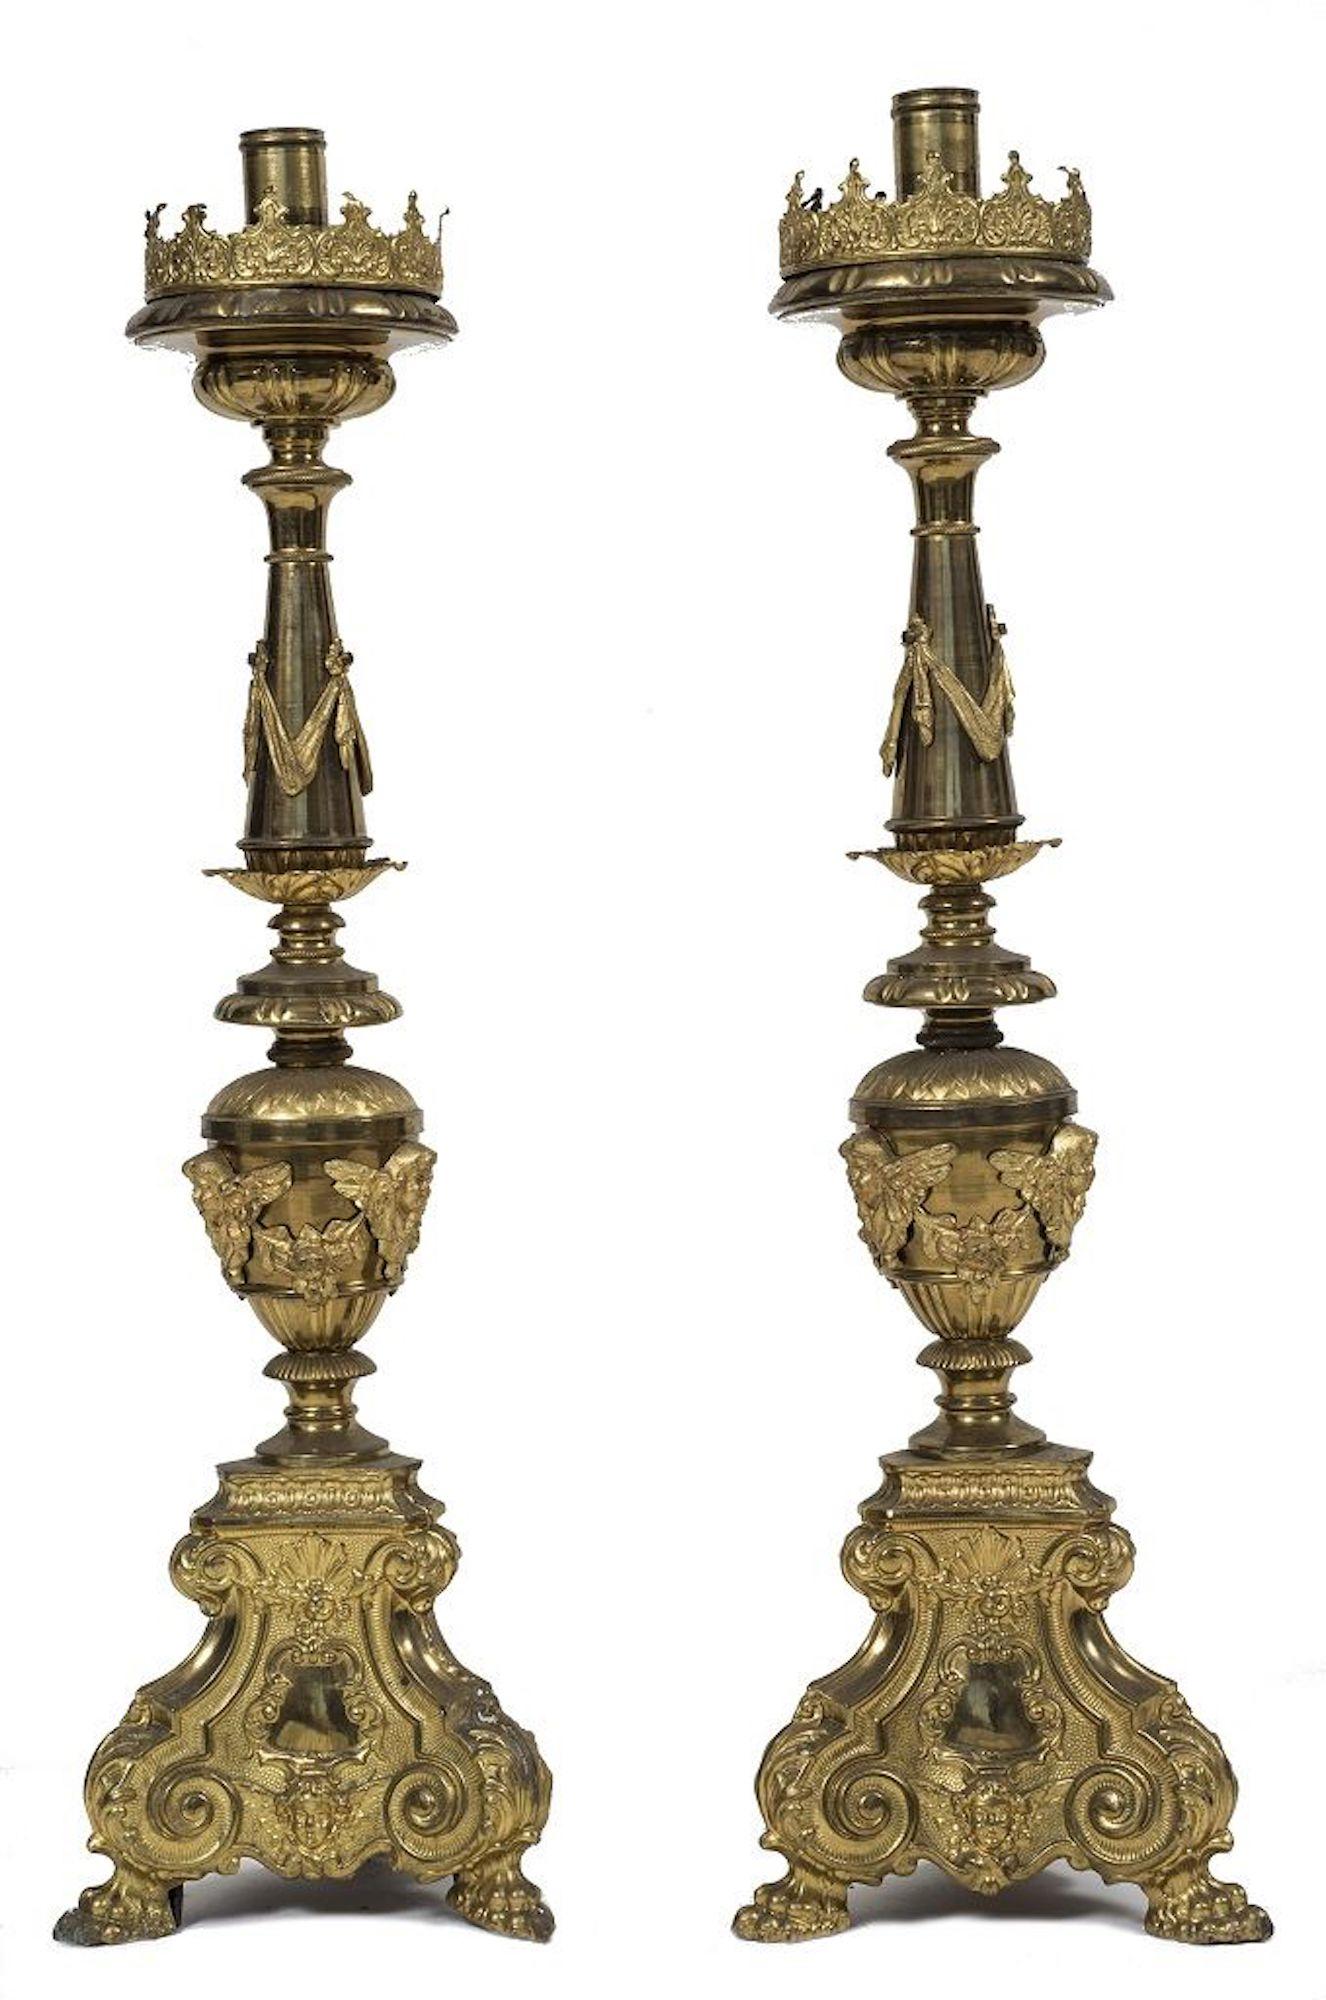 Couple of big candlesticks is a very refined decorative object in brass and gilded metal.
In Baroque style.
Realized at the end of the 18th century.
Very good conditions.

This object is shipped from Italy. Under existing legislation, any